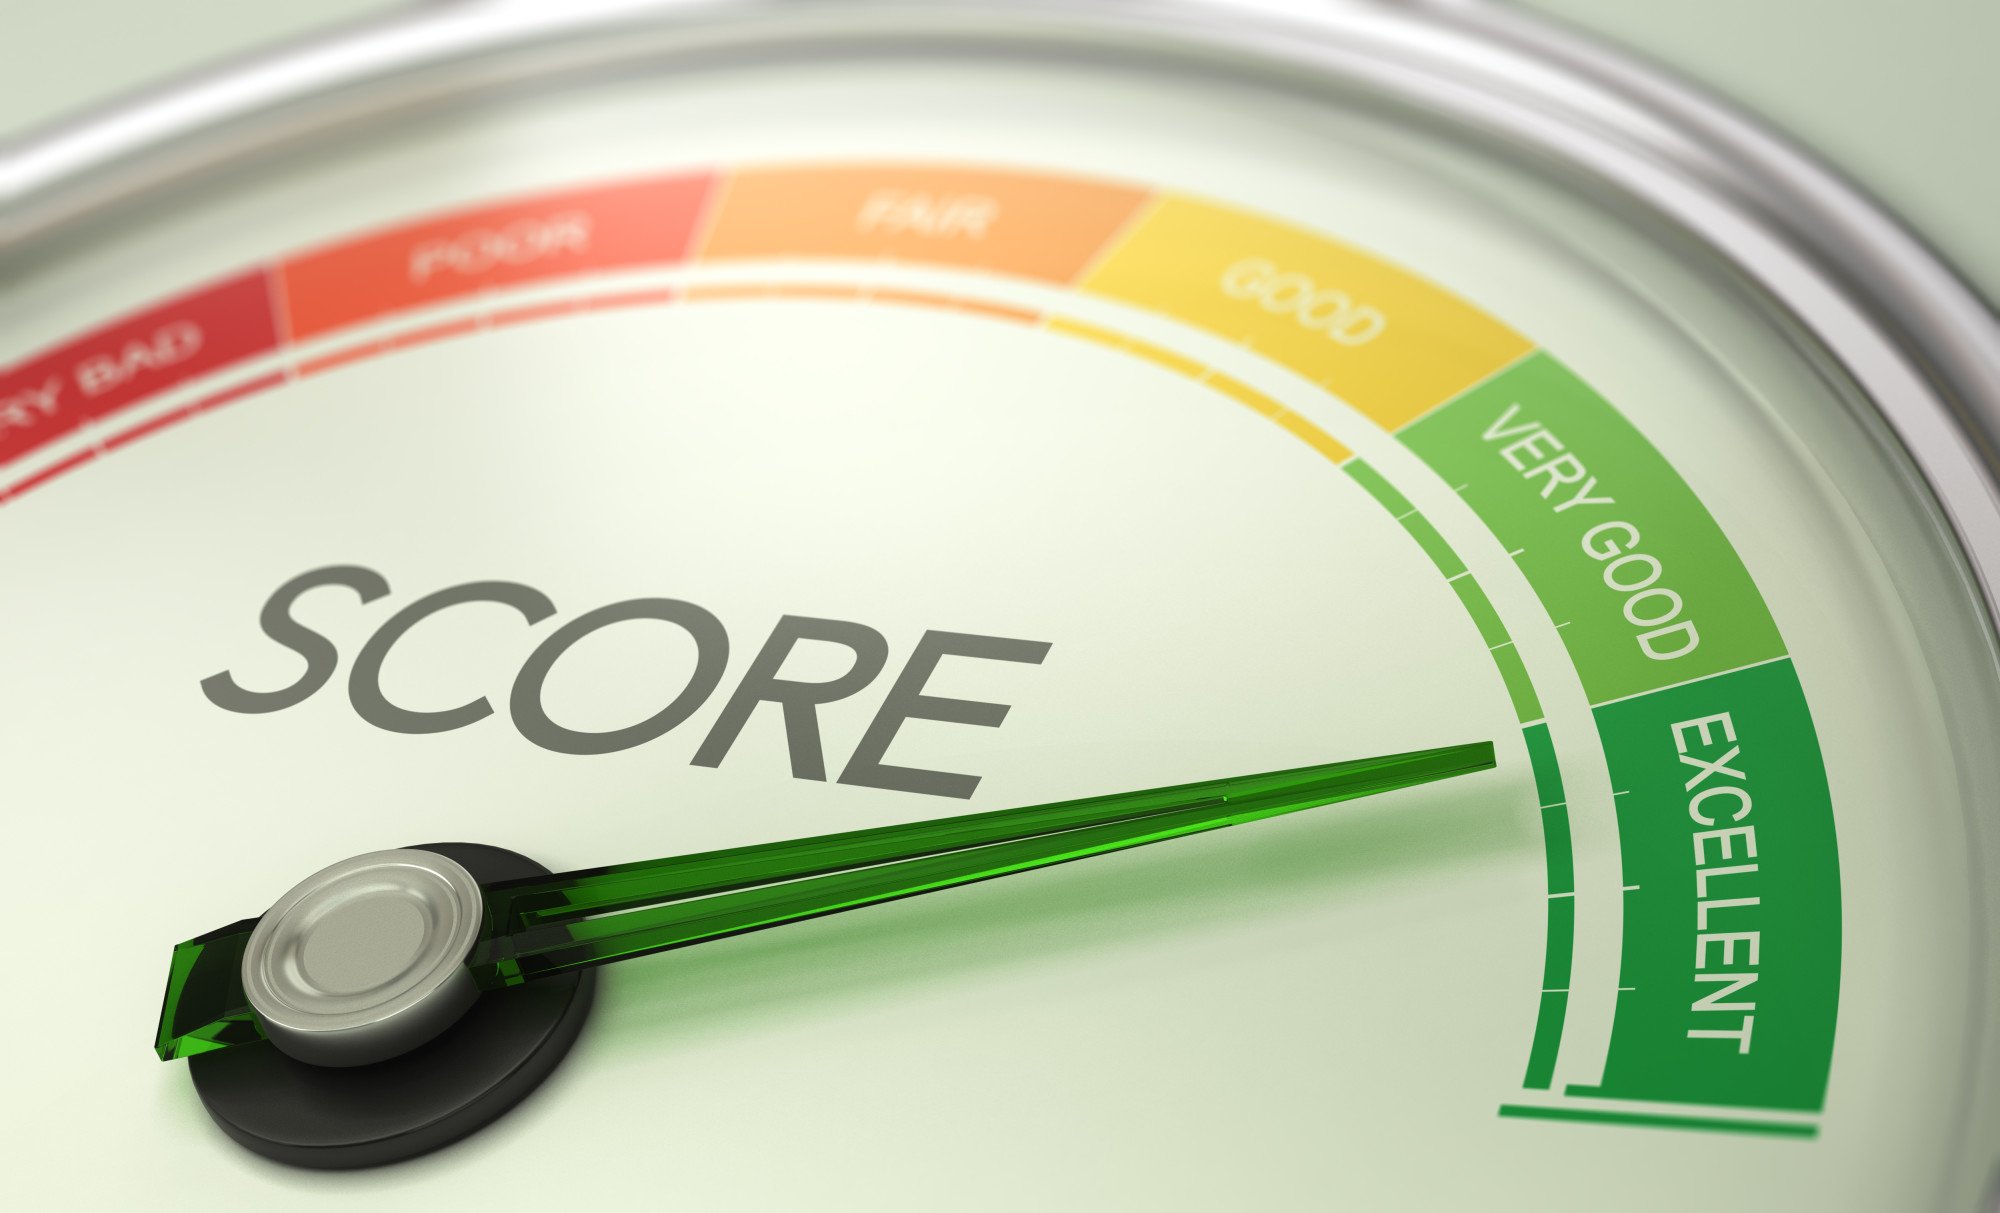 Go from Zero to the Highest Credit Score Possible with These 5 Steps